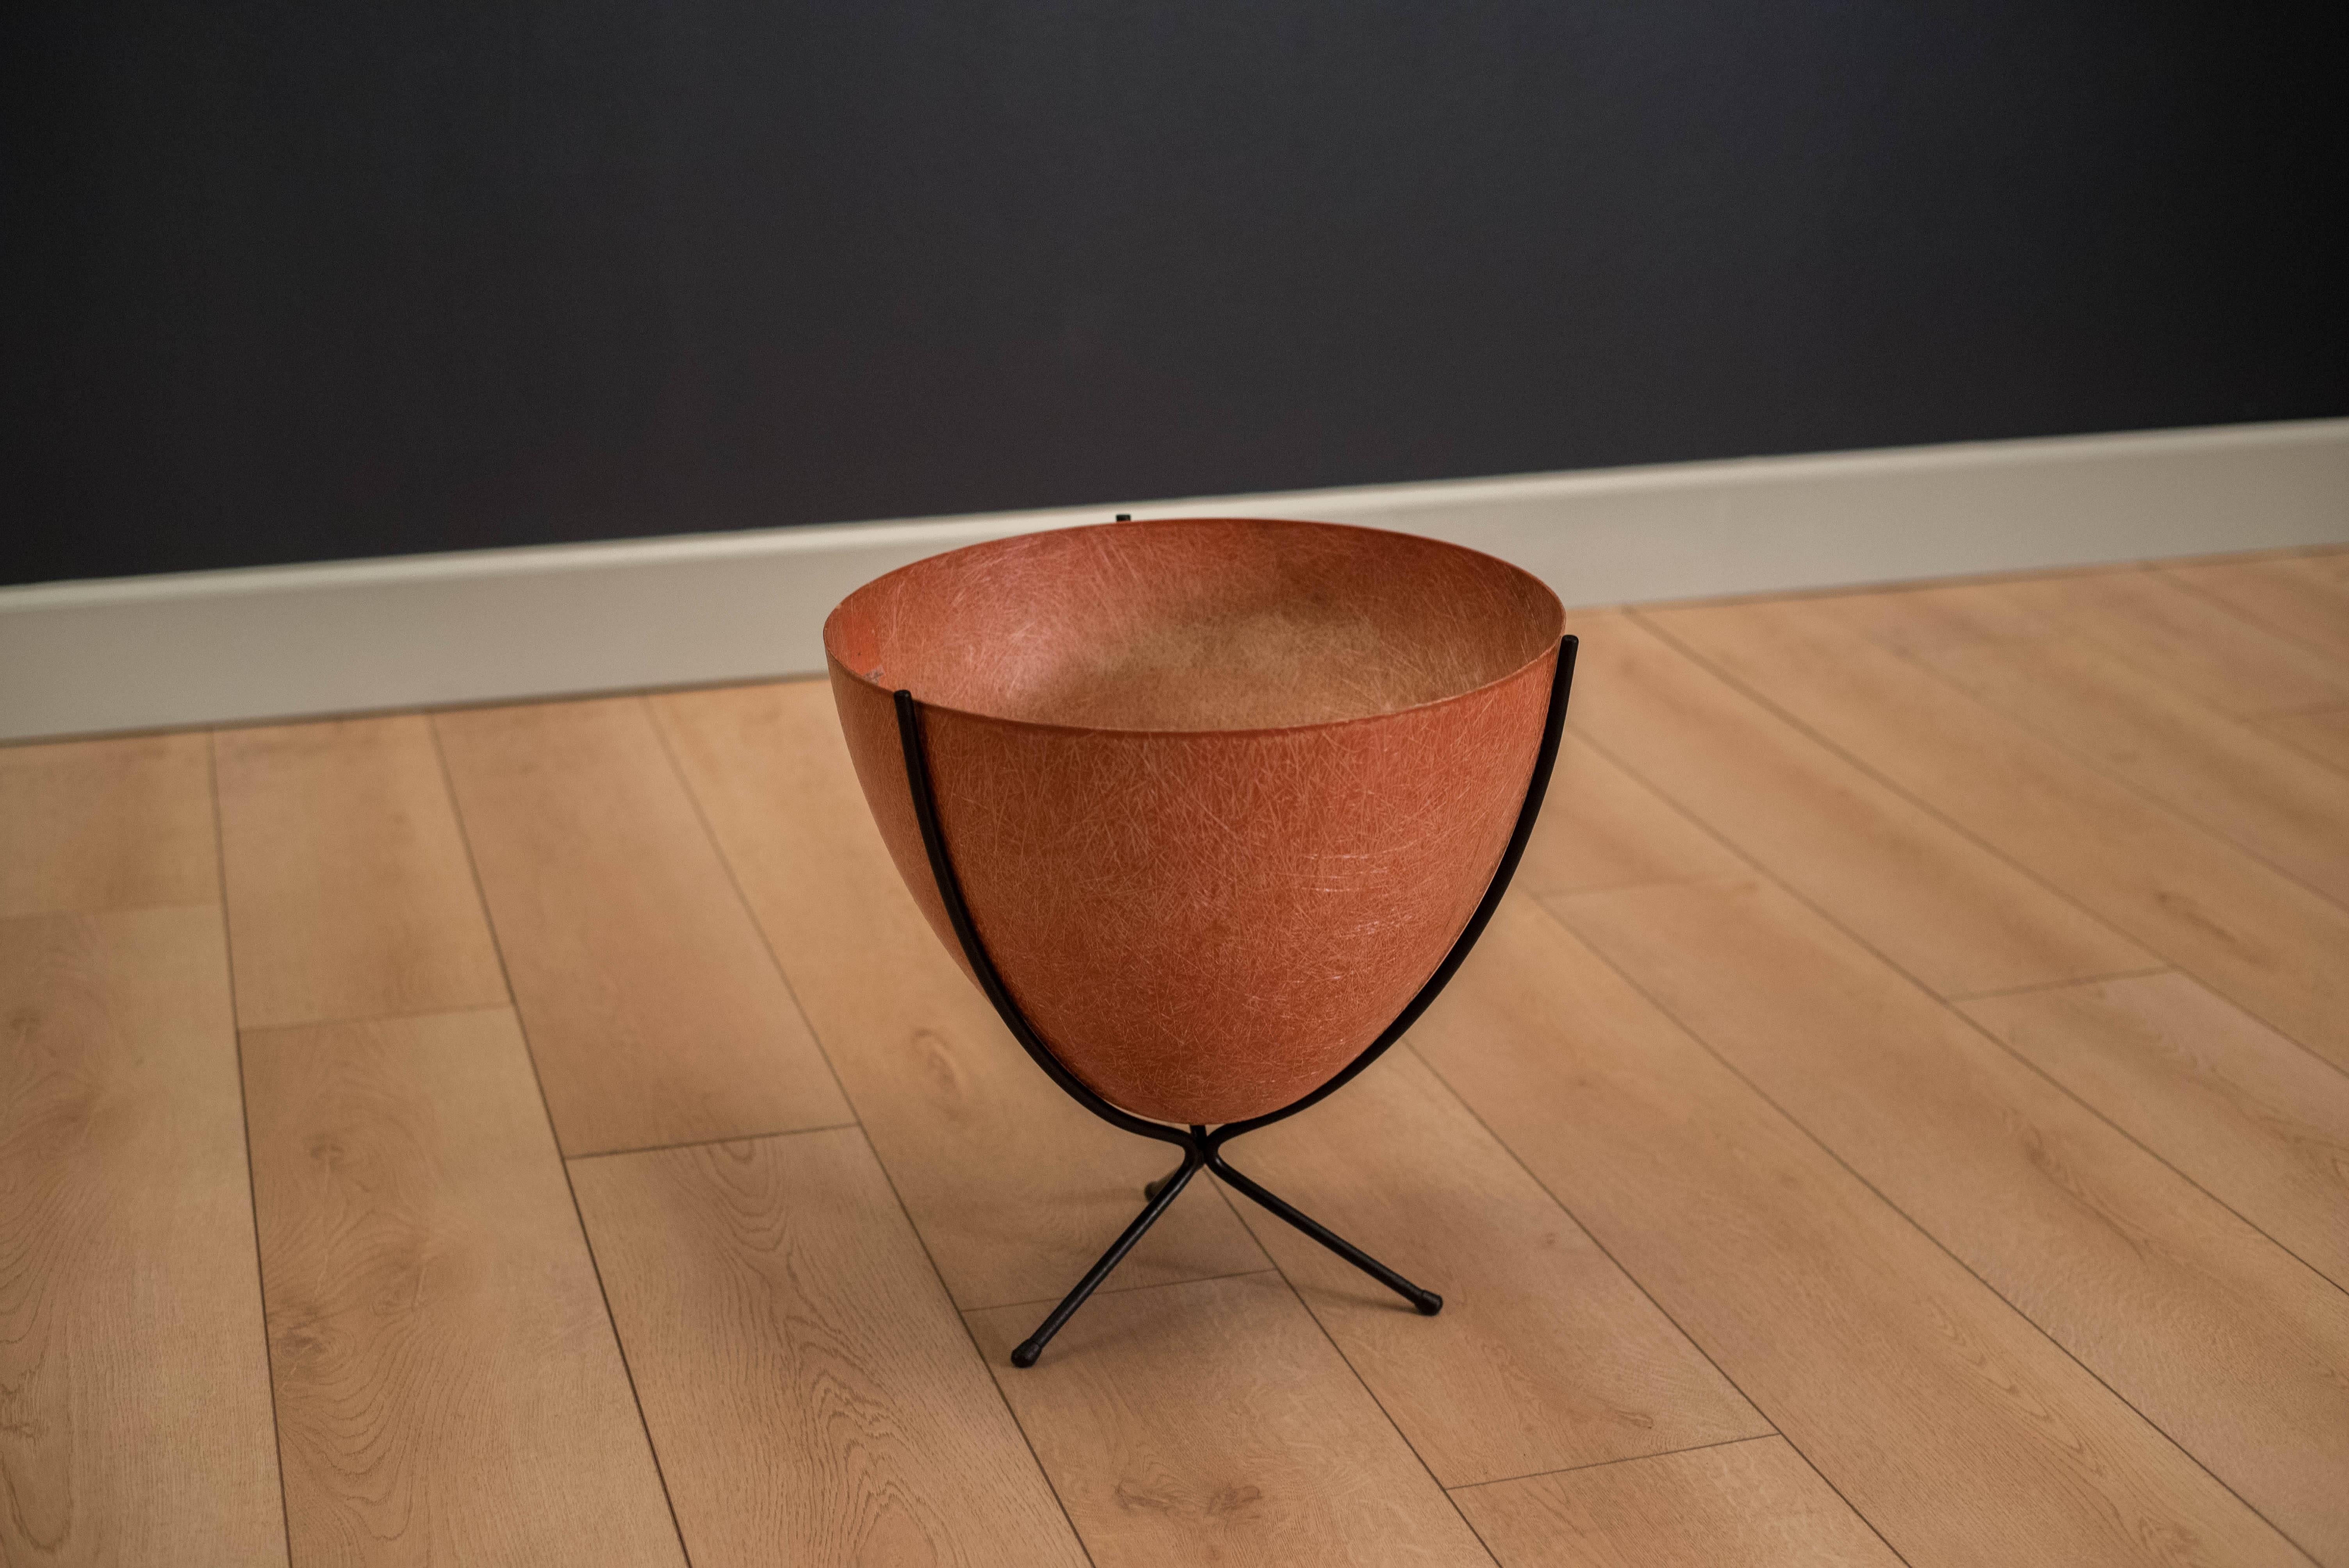 Vintage fiberglass bullet planter by Kimball Manufacturing Co. of San Francisco, circa 1960s. This piece comes in a vibrant orange color and black metal base.